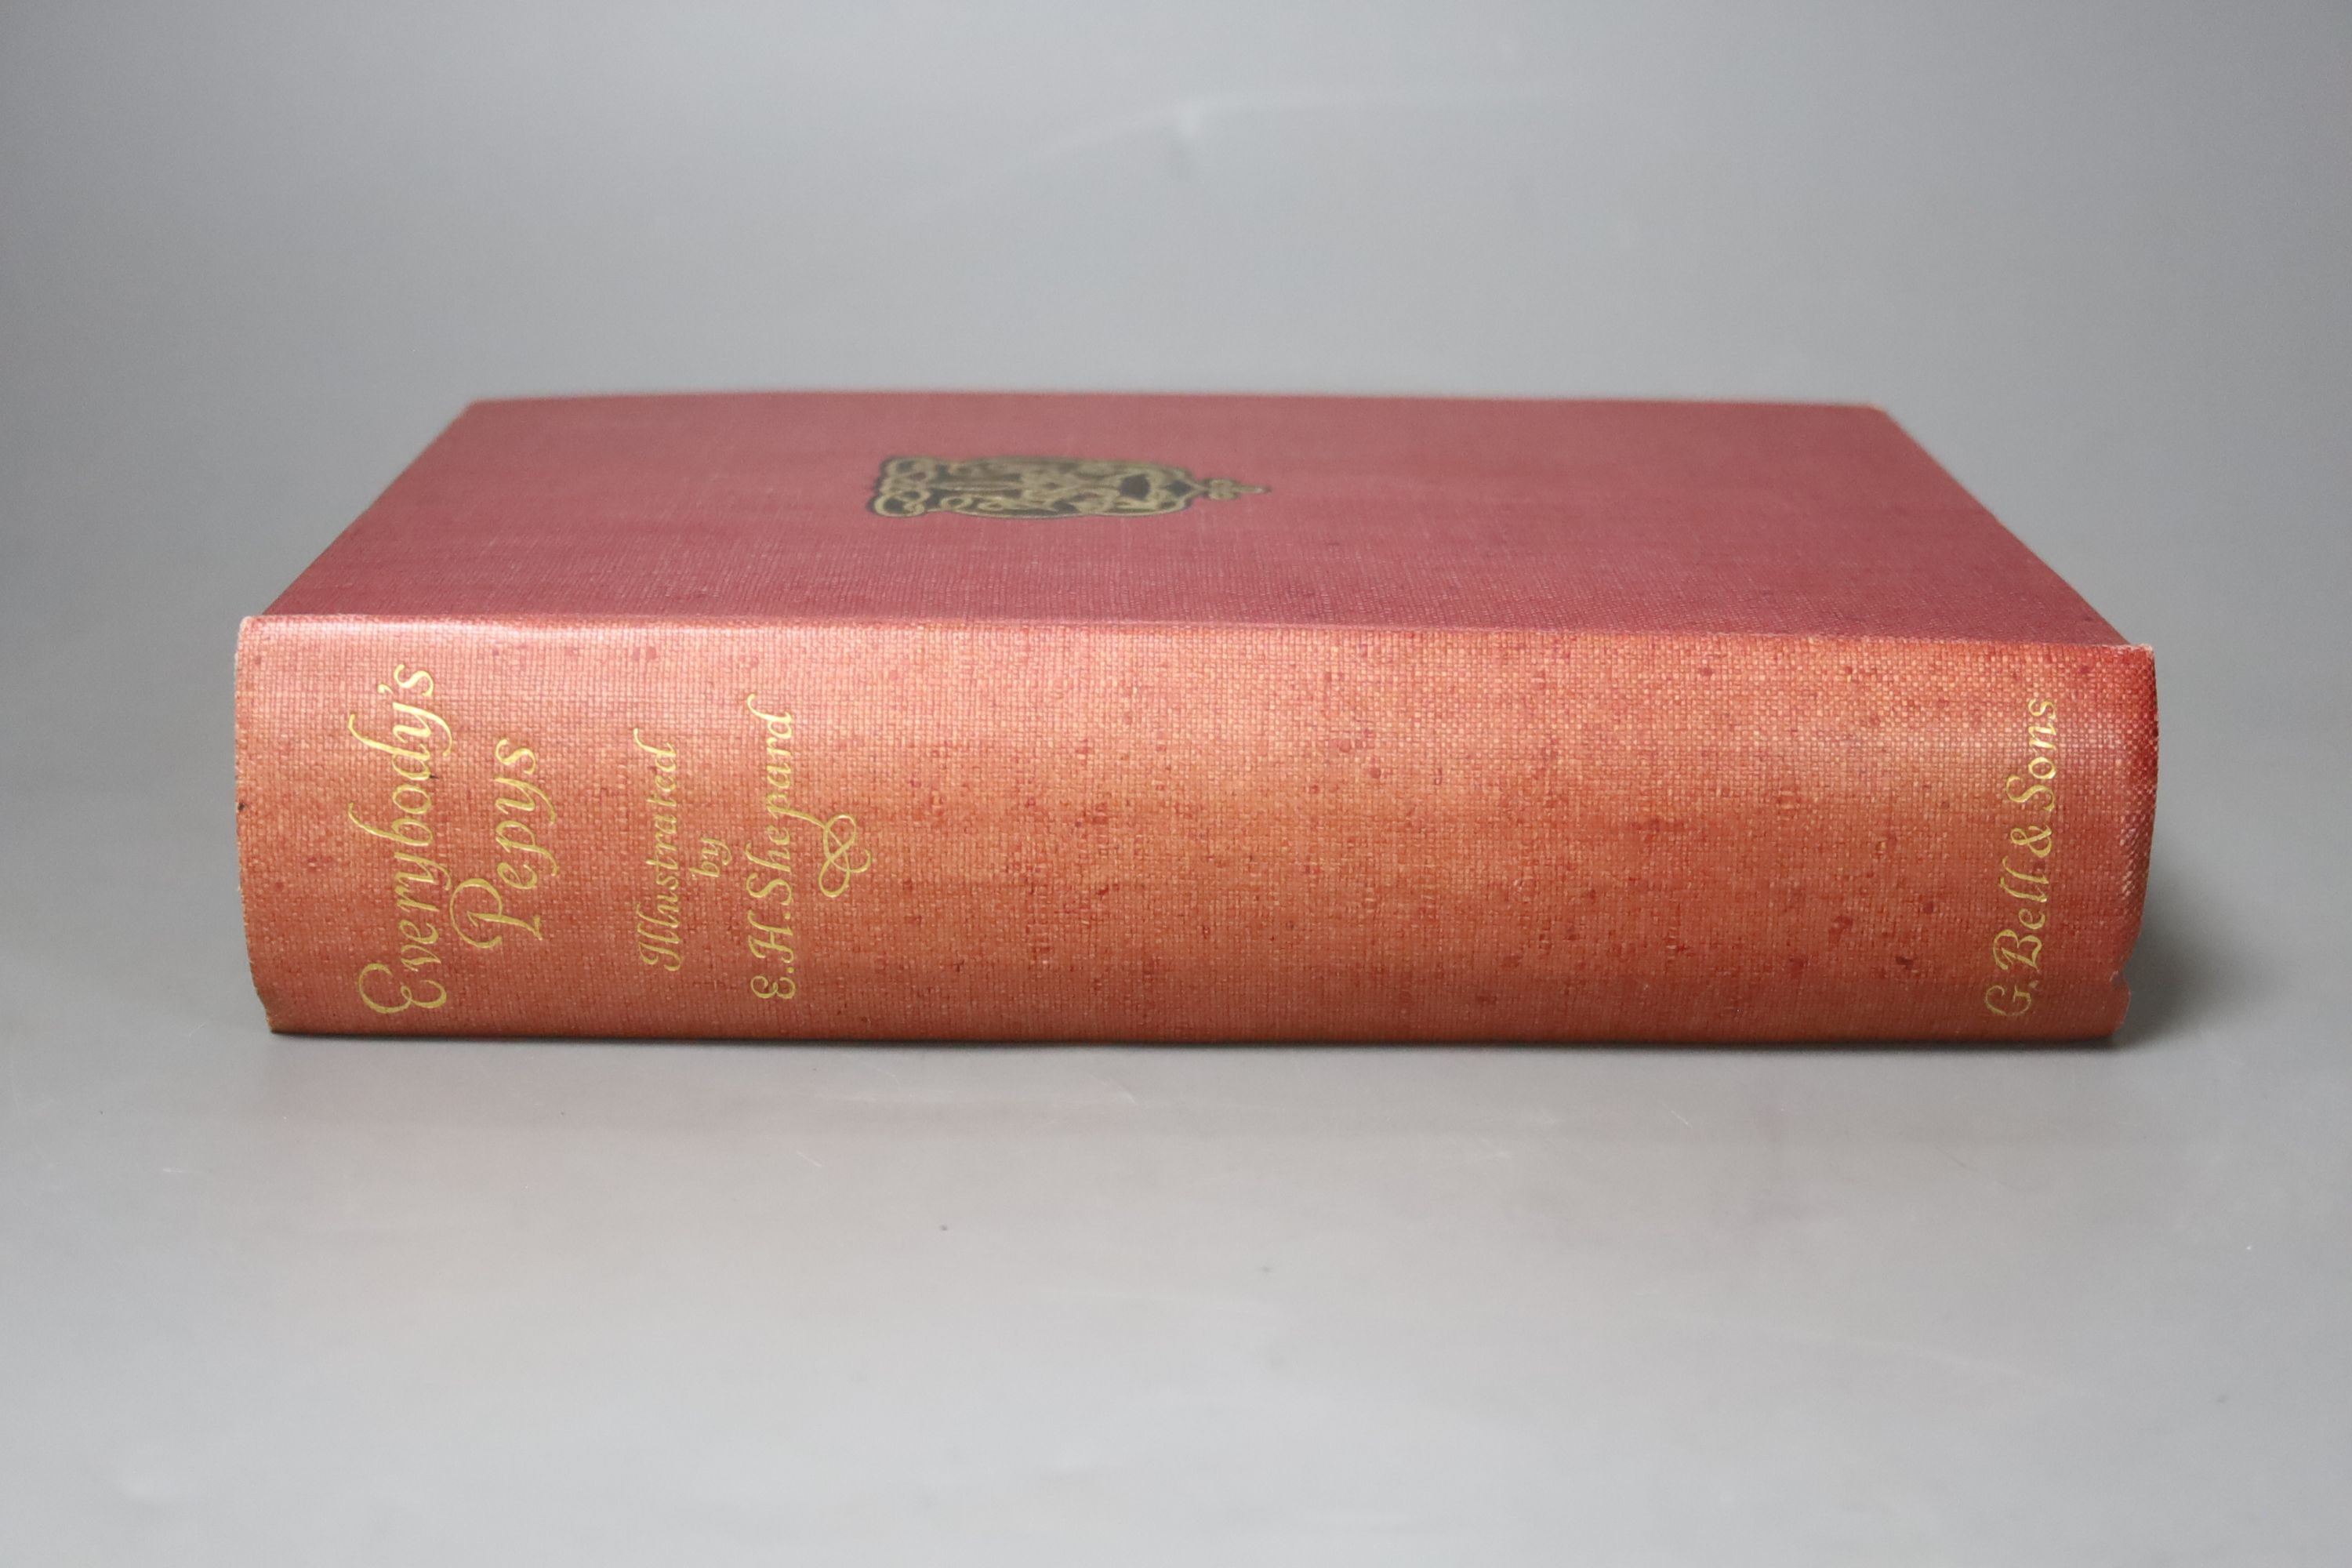 Pepys, Samuel (edited and abridged by O.F. Morshead) - Everybody’s Pepys, 8vo, red cloth, one of 350, signed by the illustrator Ernest Shepard, G. Bell & Sons, London, 1926